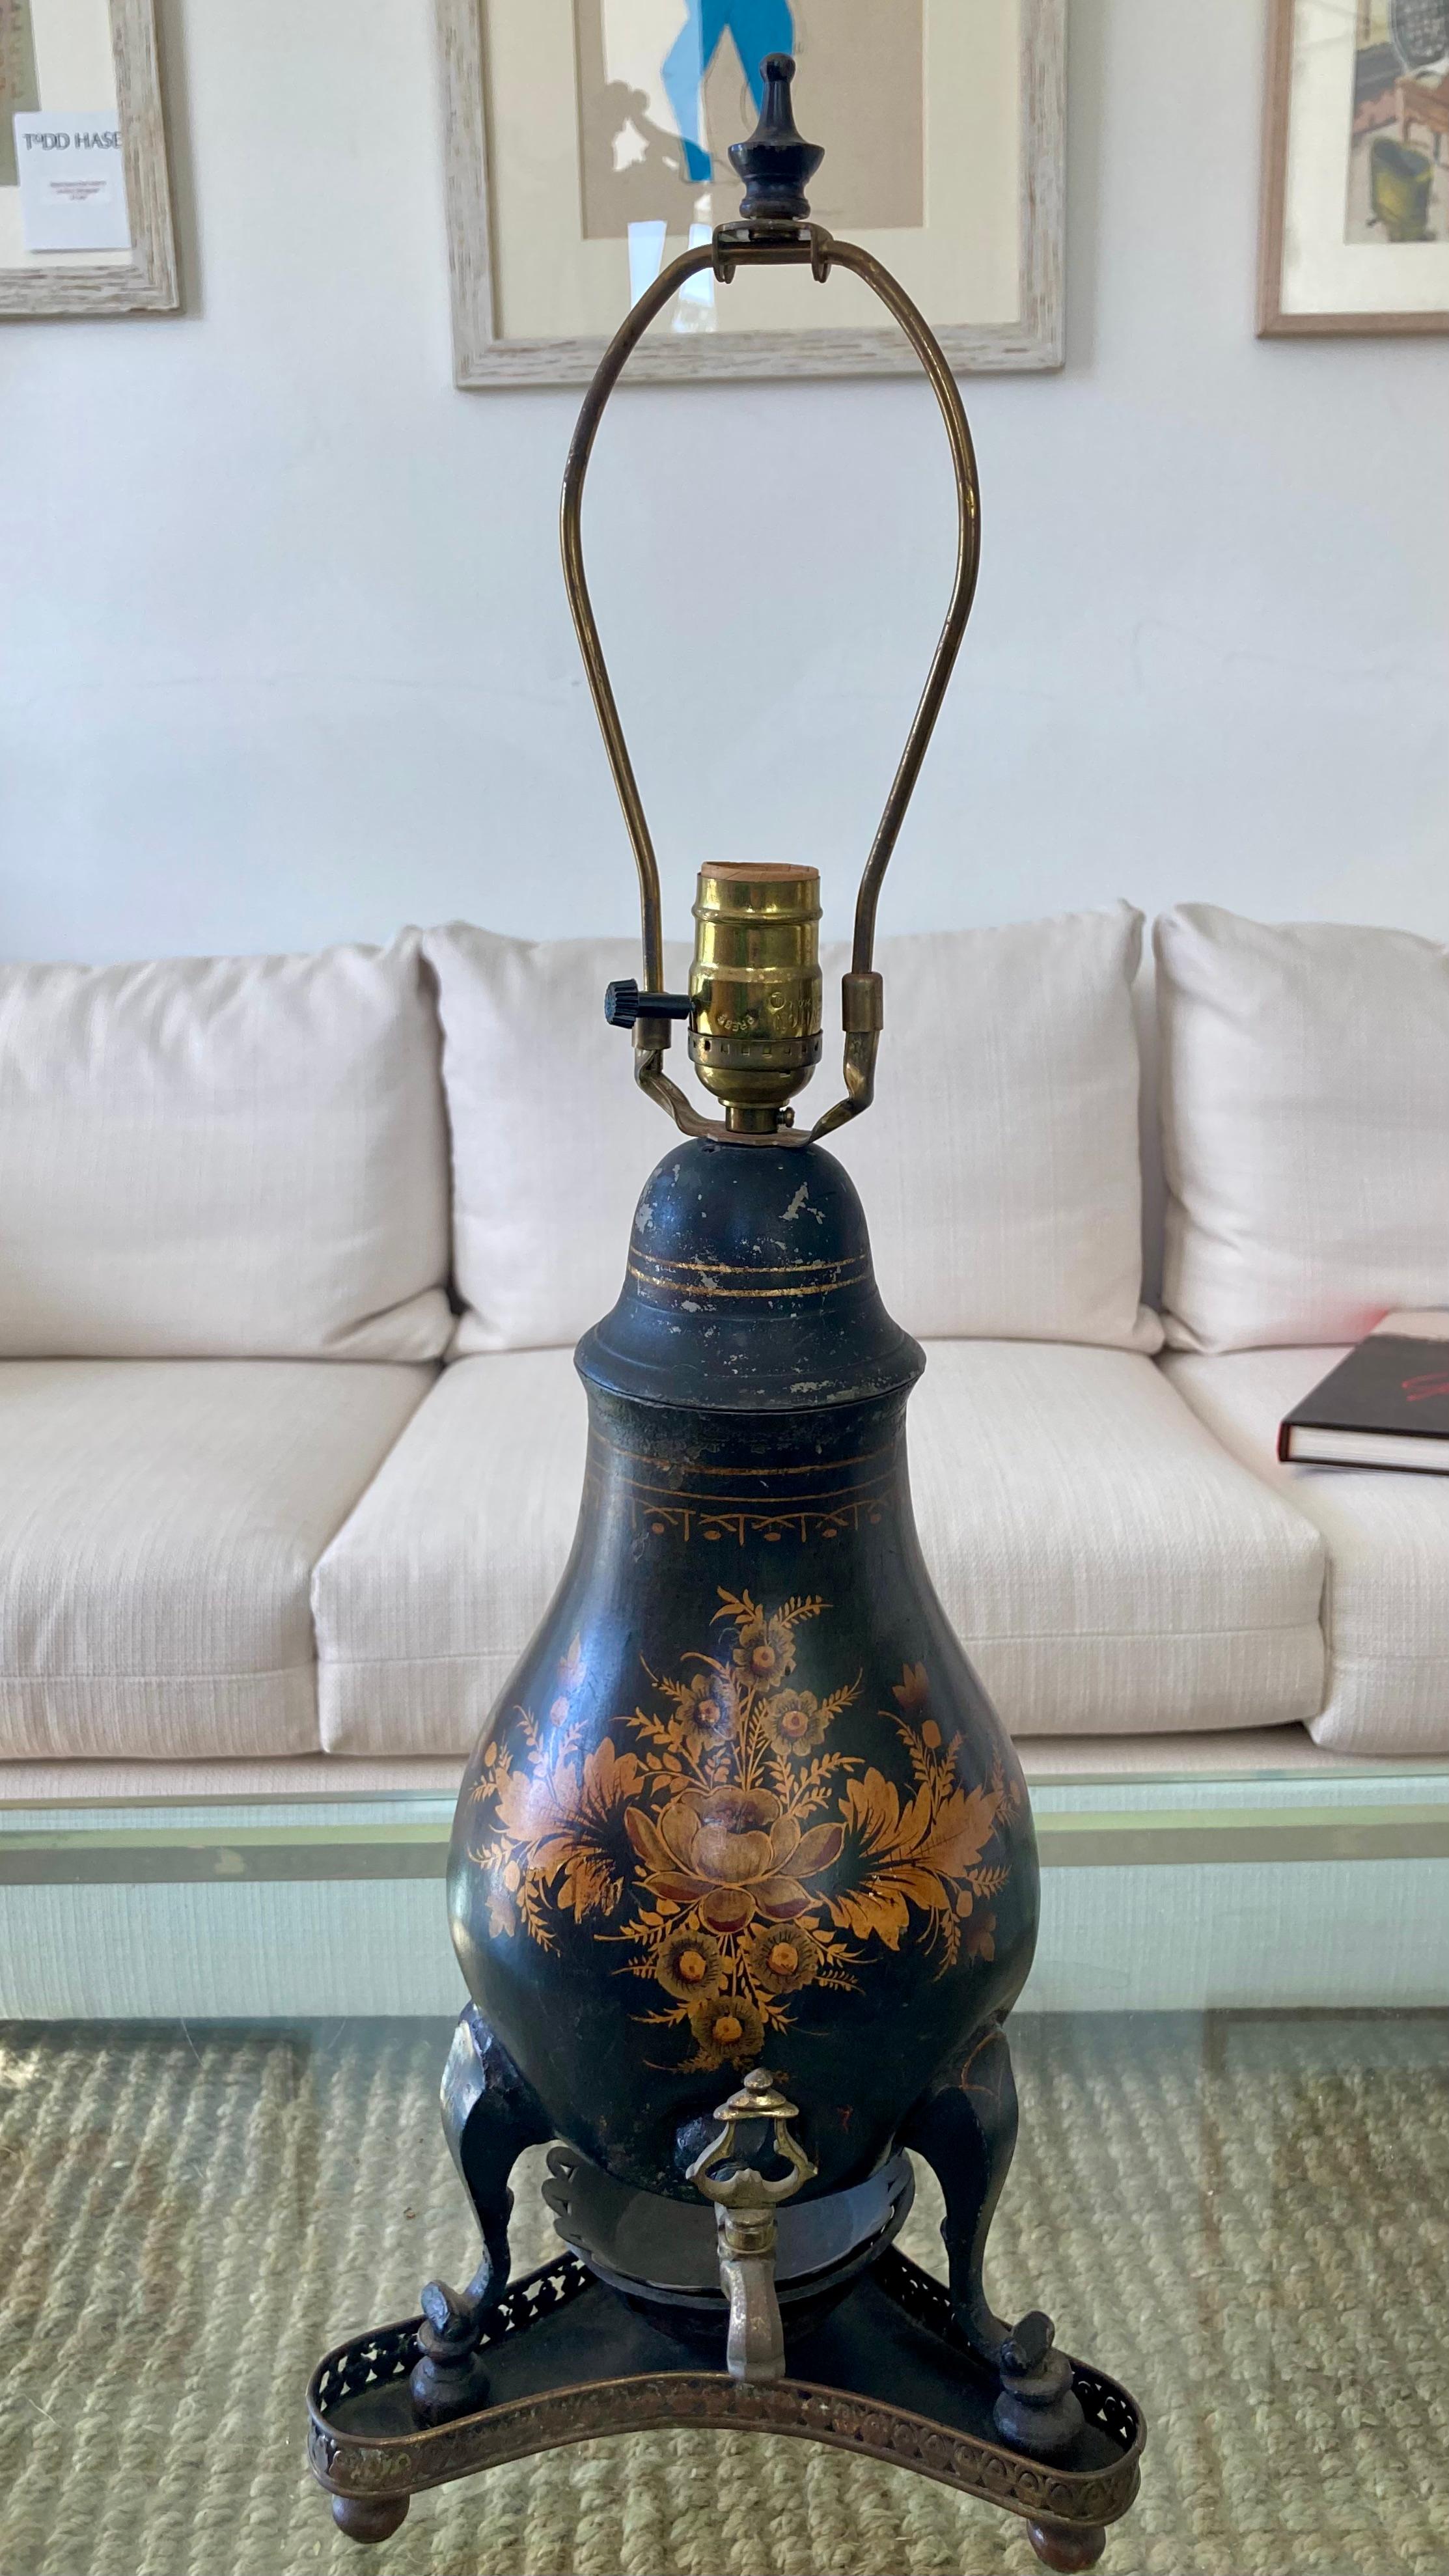 Beautiful French tole decanter lamp. Fabulous details of metal work and painting. Add some French style to your home.